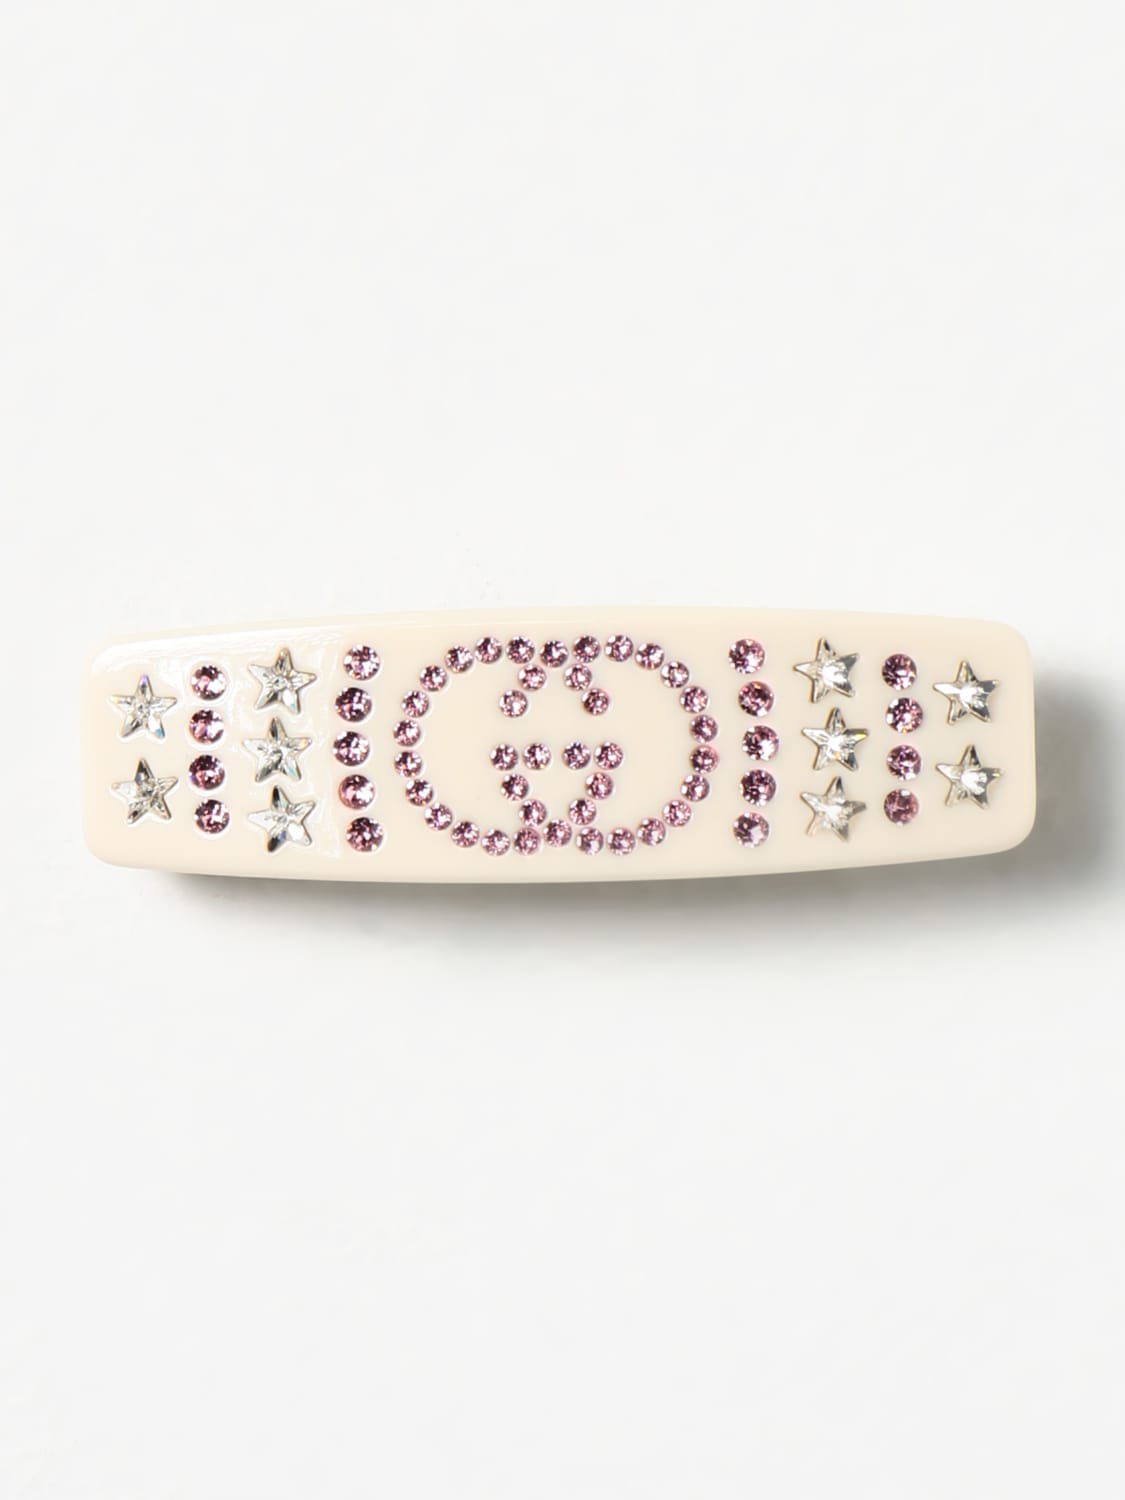 GUCCI: clip in acetate with set rhinestones - Pink